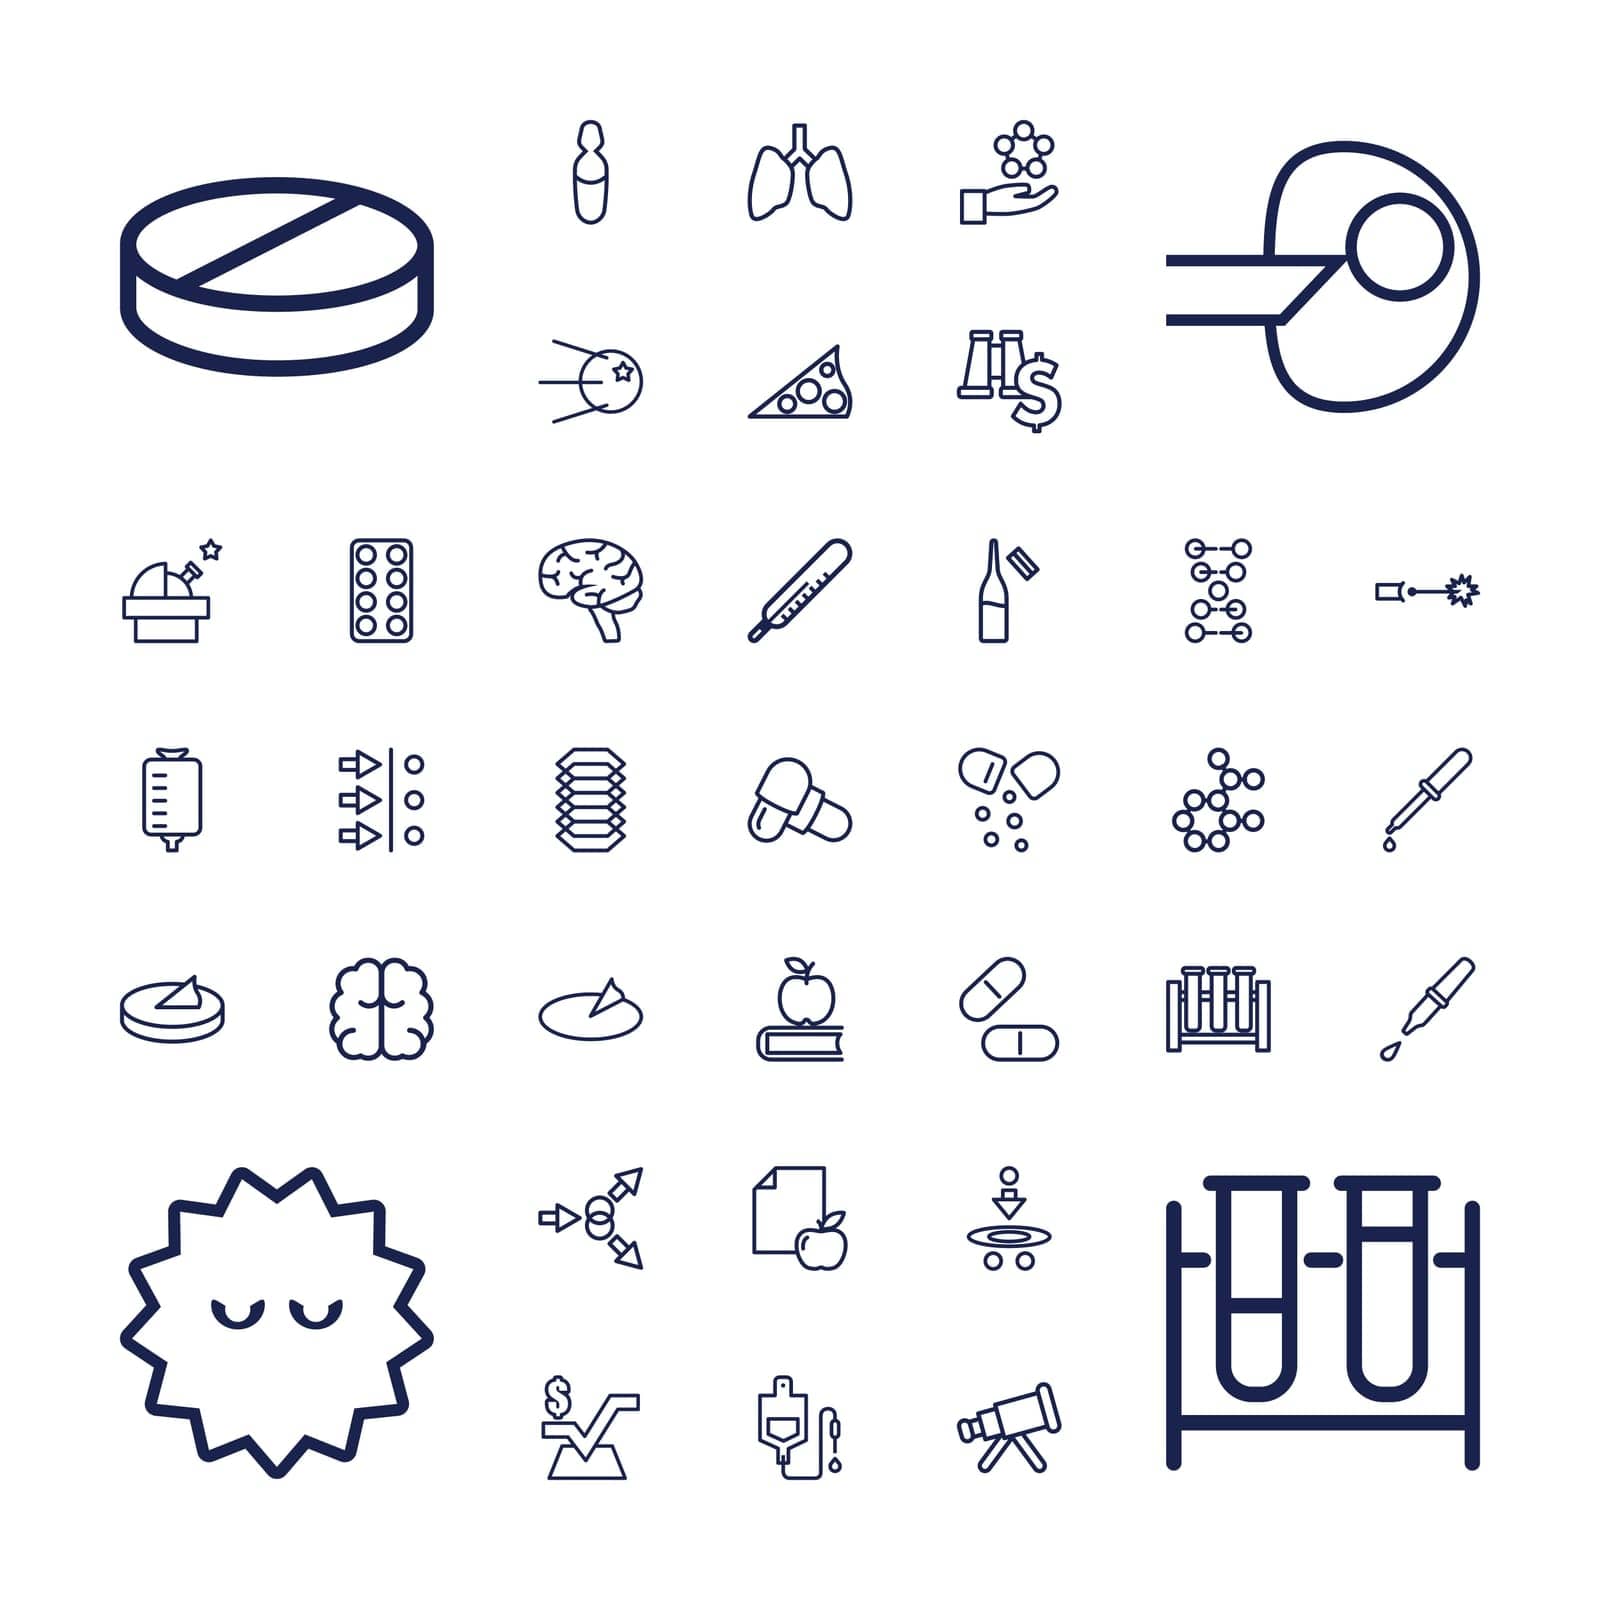 drop,symbol,medical,circuit,bacteria,book,icon,sign,pill,dollar,observatory,apple,paper,dna,and,lungs,vector,hand,on,move,set,test,in,binoculars,electric,counter,brain,sundial,square,core,with,tube,science,pipette,ampoule,illustration,thermometer,atom,telescope,mathematical